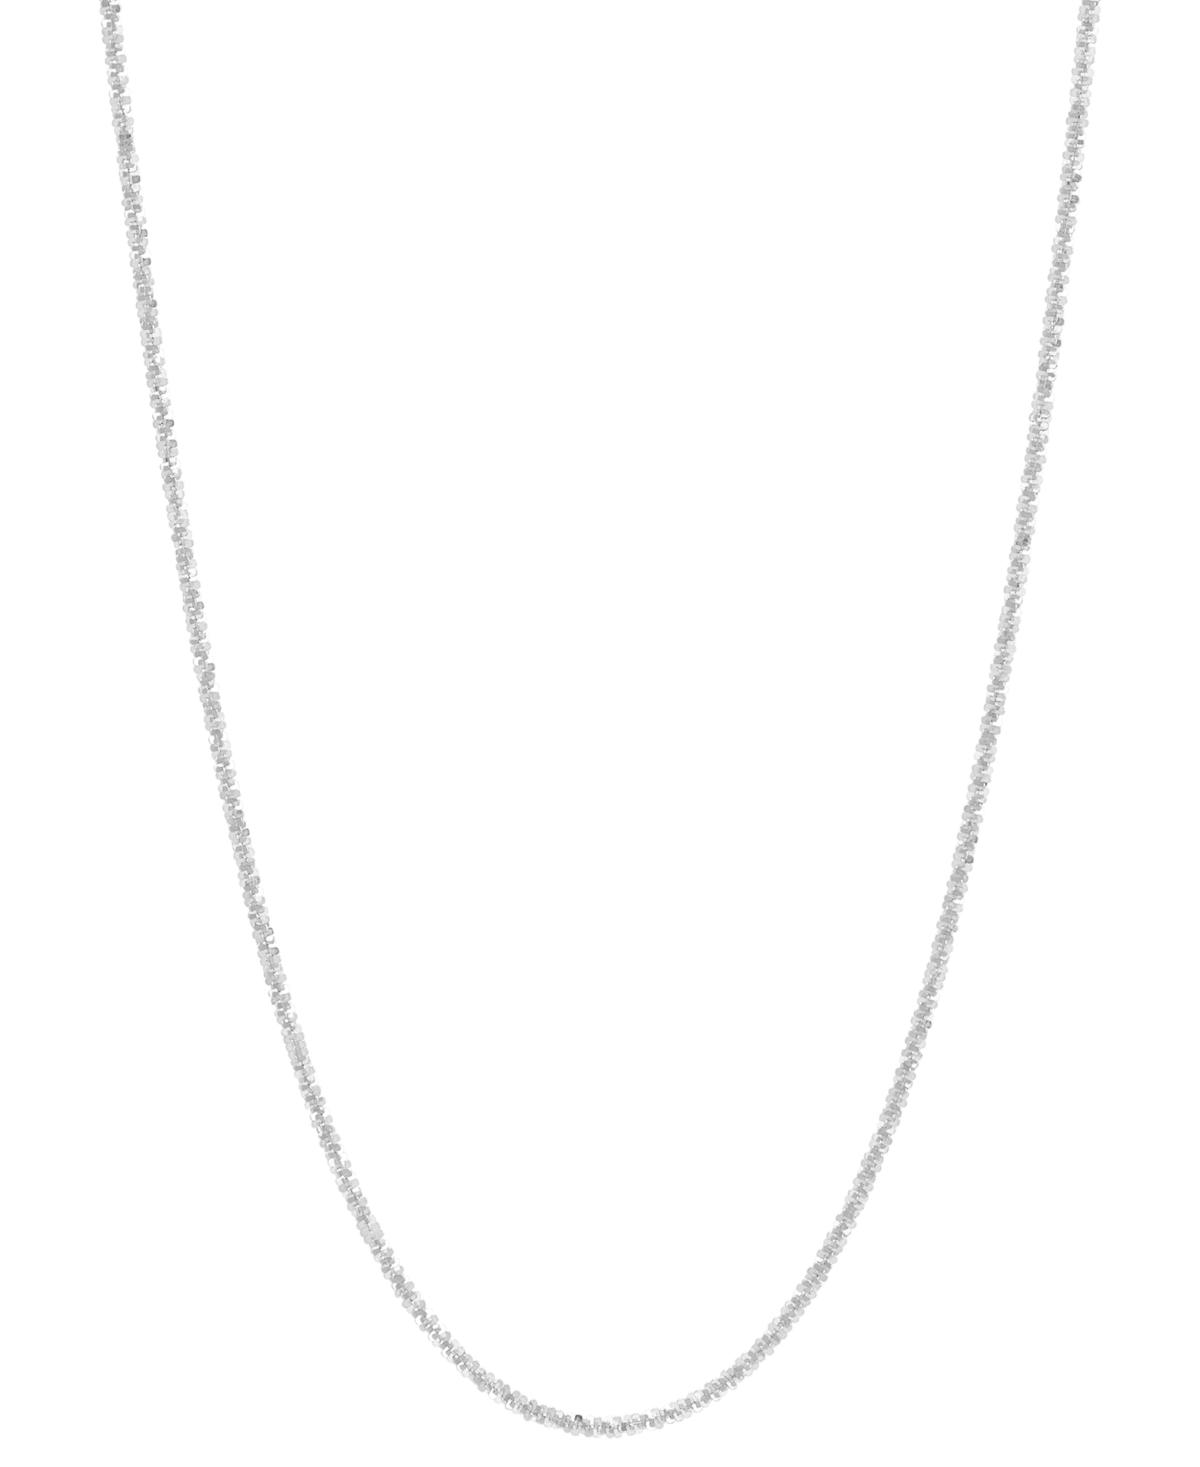 Italian Gold Crisscross Link 18" Chain Necklace In 14k Gold In White Gold